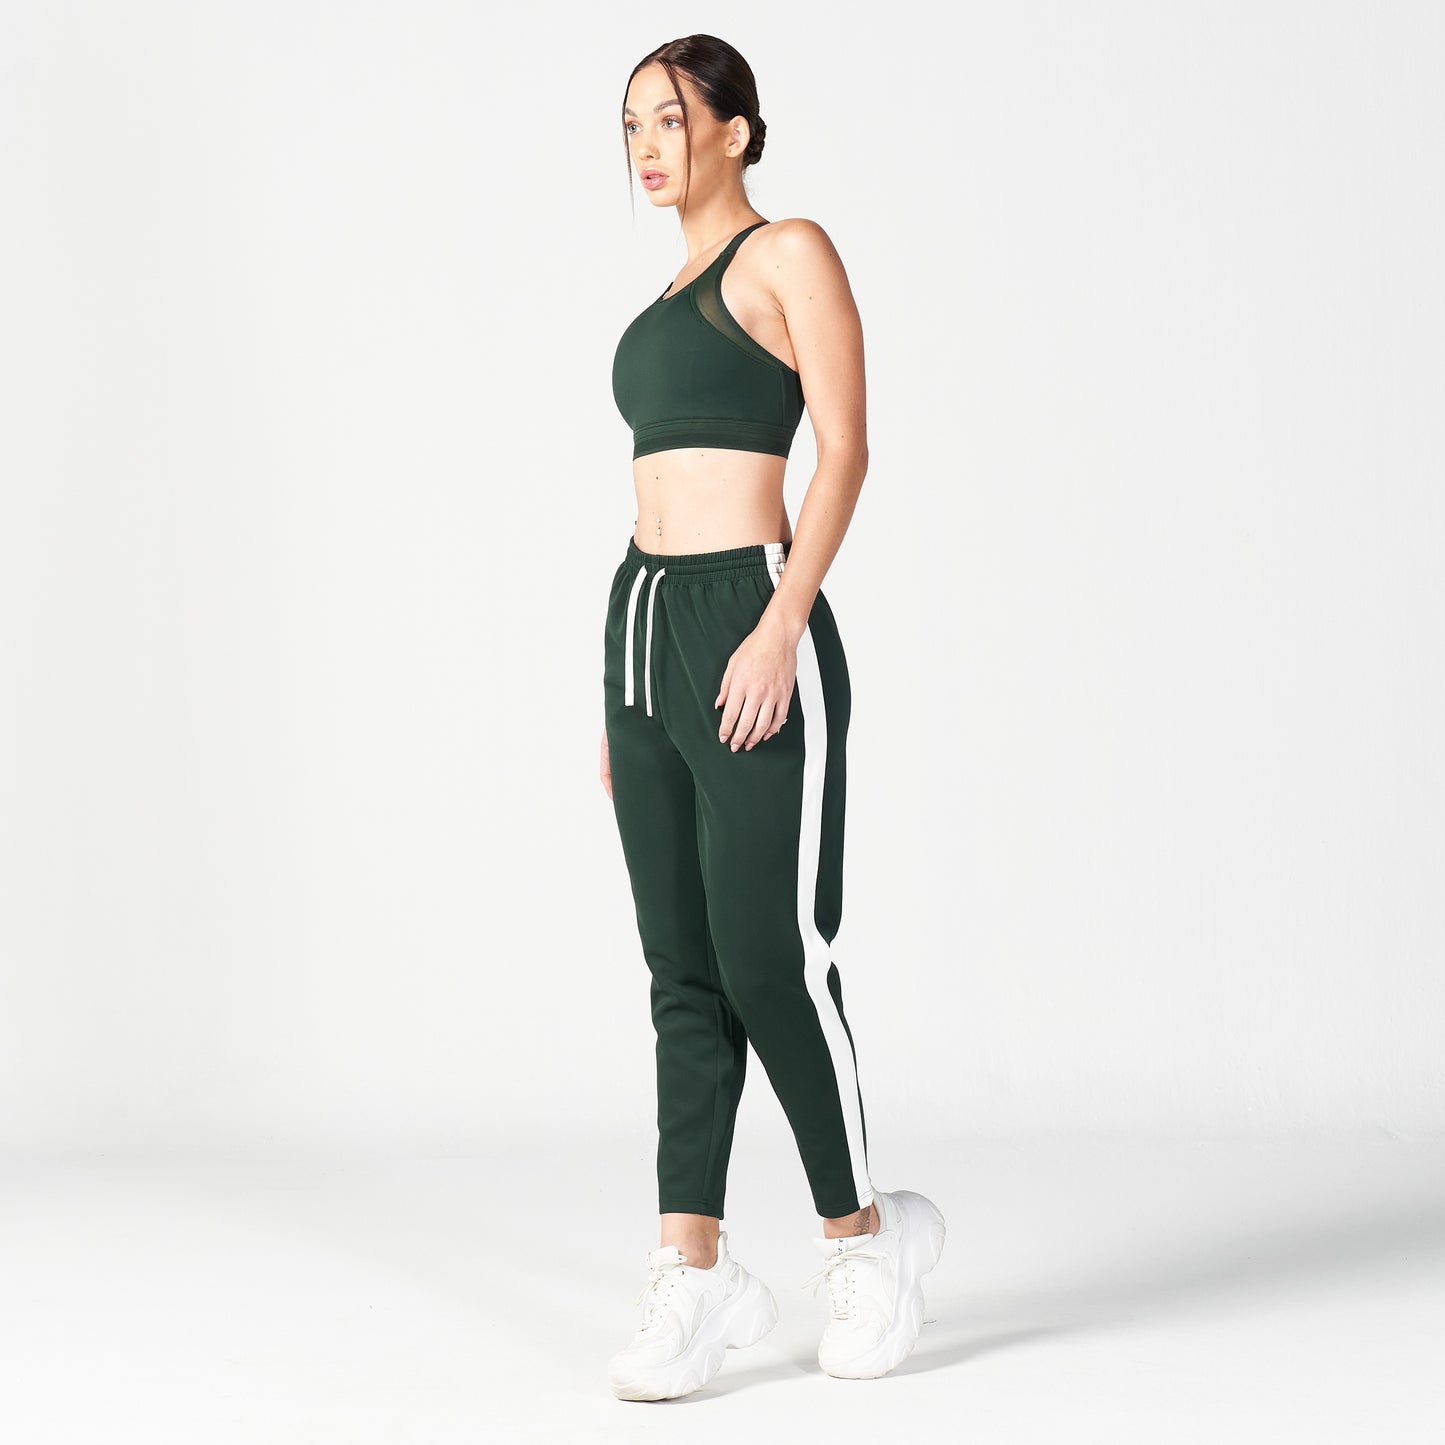 squatwolf-workout-clothes-core-high-support-y-back-bra-green-sports-bra-for-gym